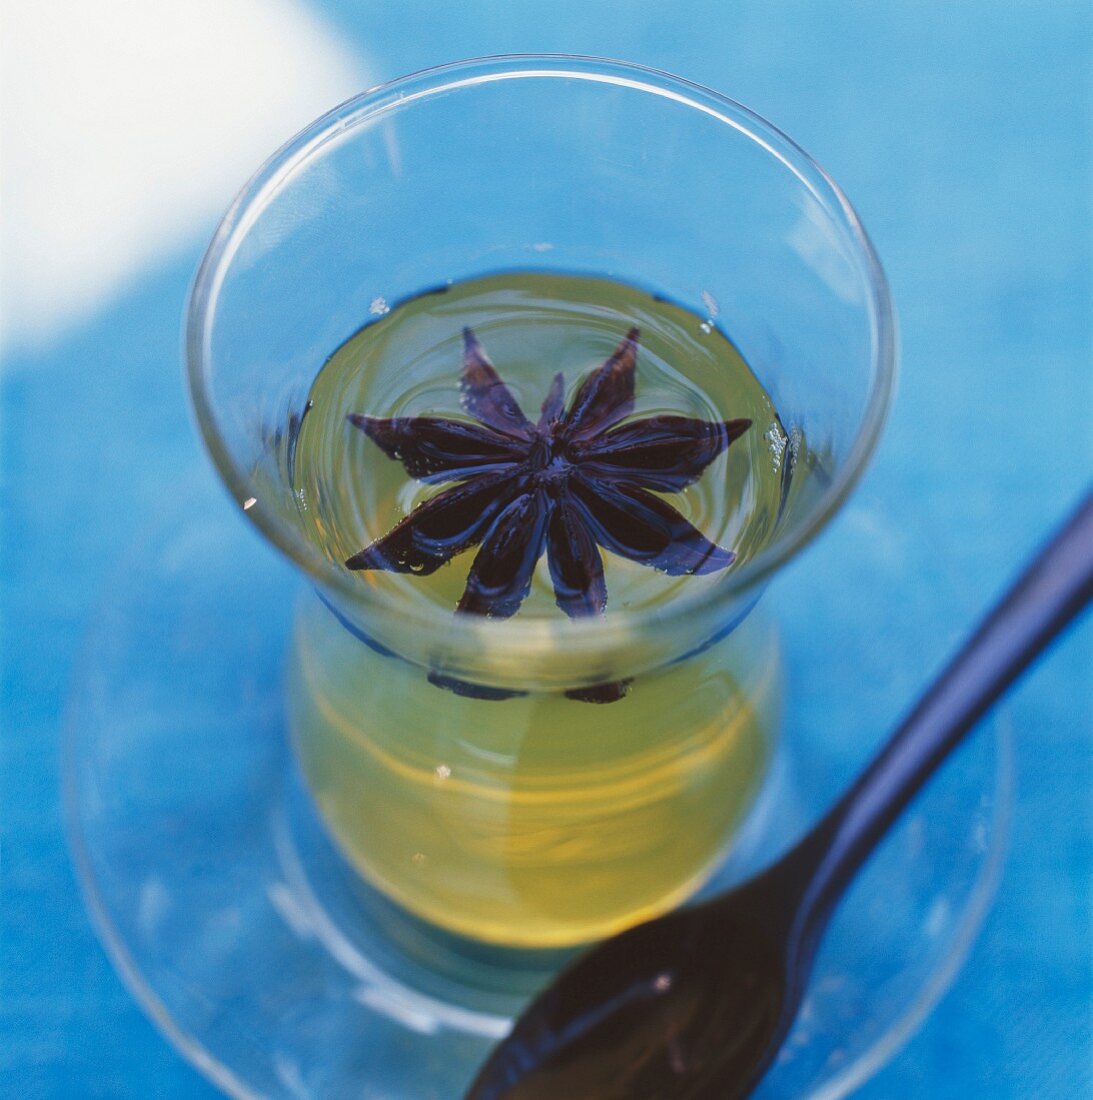 Flavoured oil with star anise